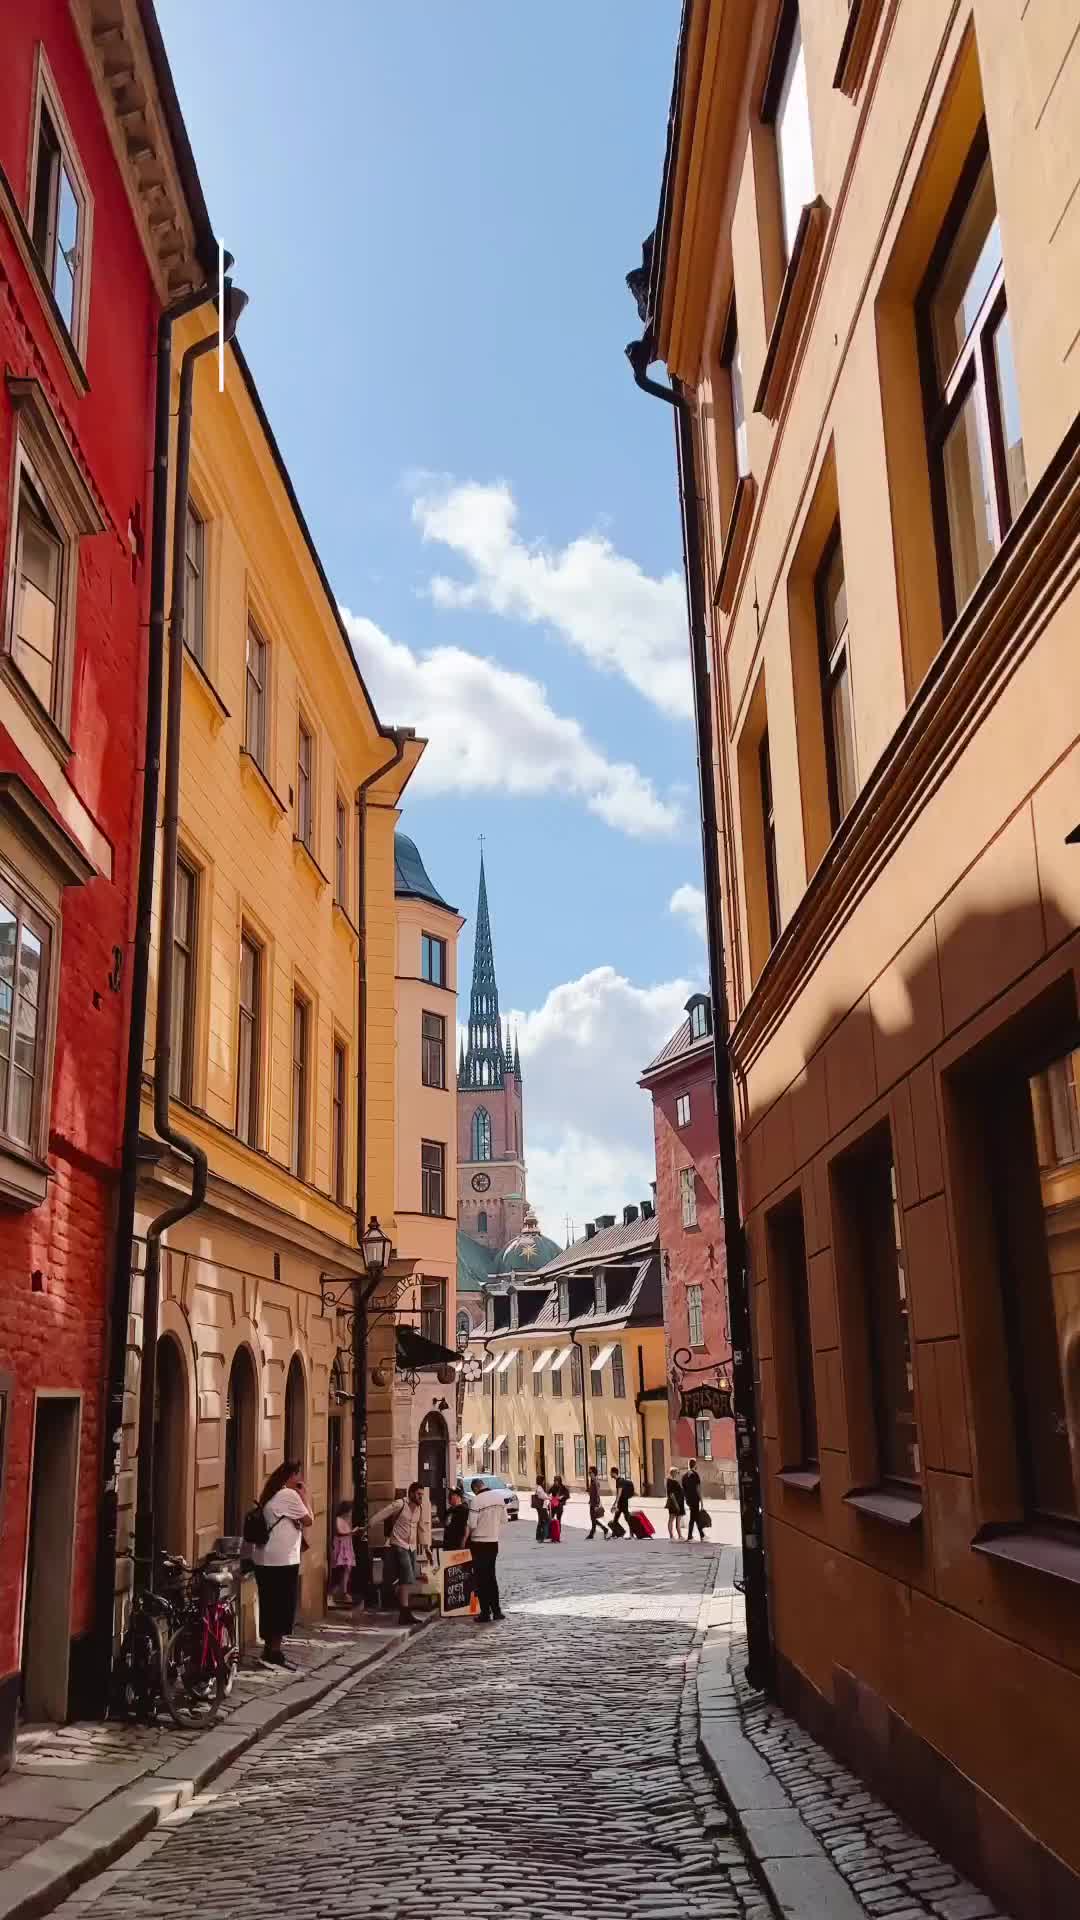 📸 Have you been to Stockholm or plan to visit someday? 

Stockholm old town is located on the compact island of Gamla Stan. You can literally see all of it in less than a couple of hours. 

Walk its narrow cobbled streets and and colourful buildings. When the sun is shining, you can enjoy the perfect play of lights and shadows on the old 17th and 18th buildings 😍

#stockholm #stockholm_insta #stockholmsweden #stockholmcity #stockholmtravel #europetravel #visiteurope #mysummer2023